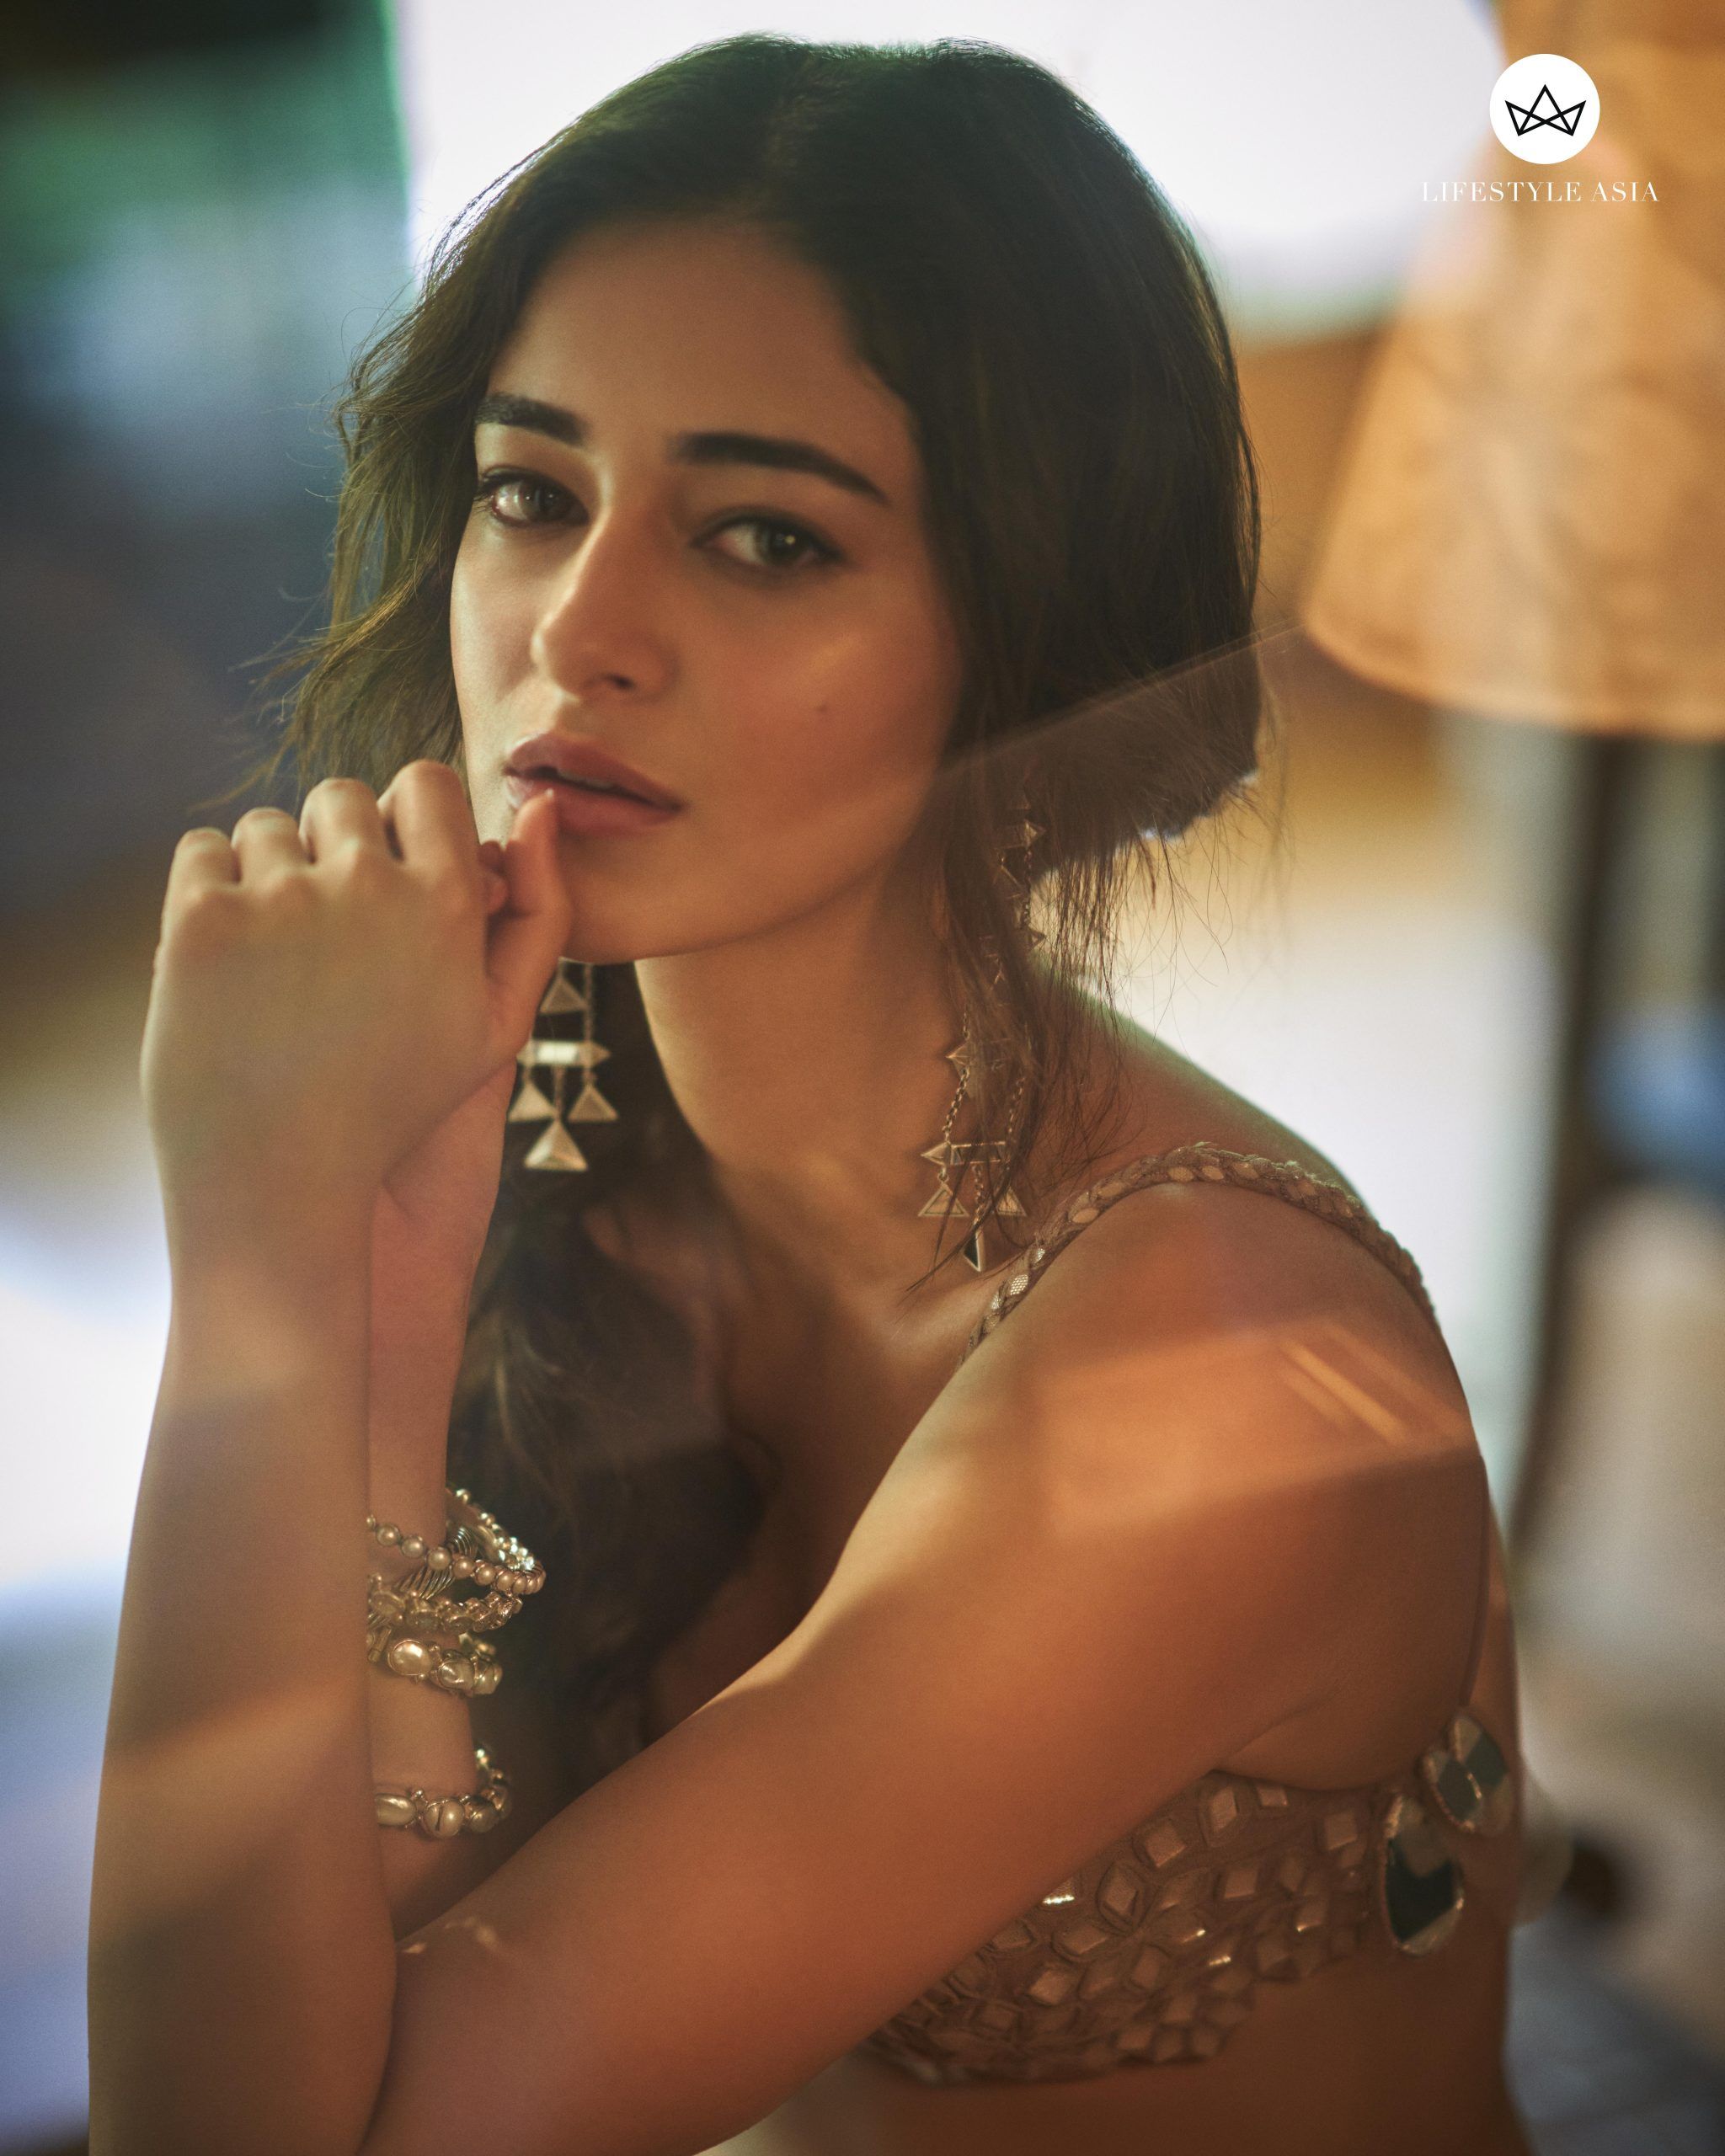 Esprit plans to rewrite their India Story, signs up Ananya Pandey